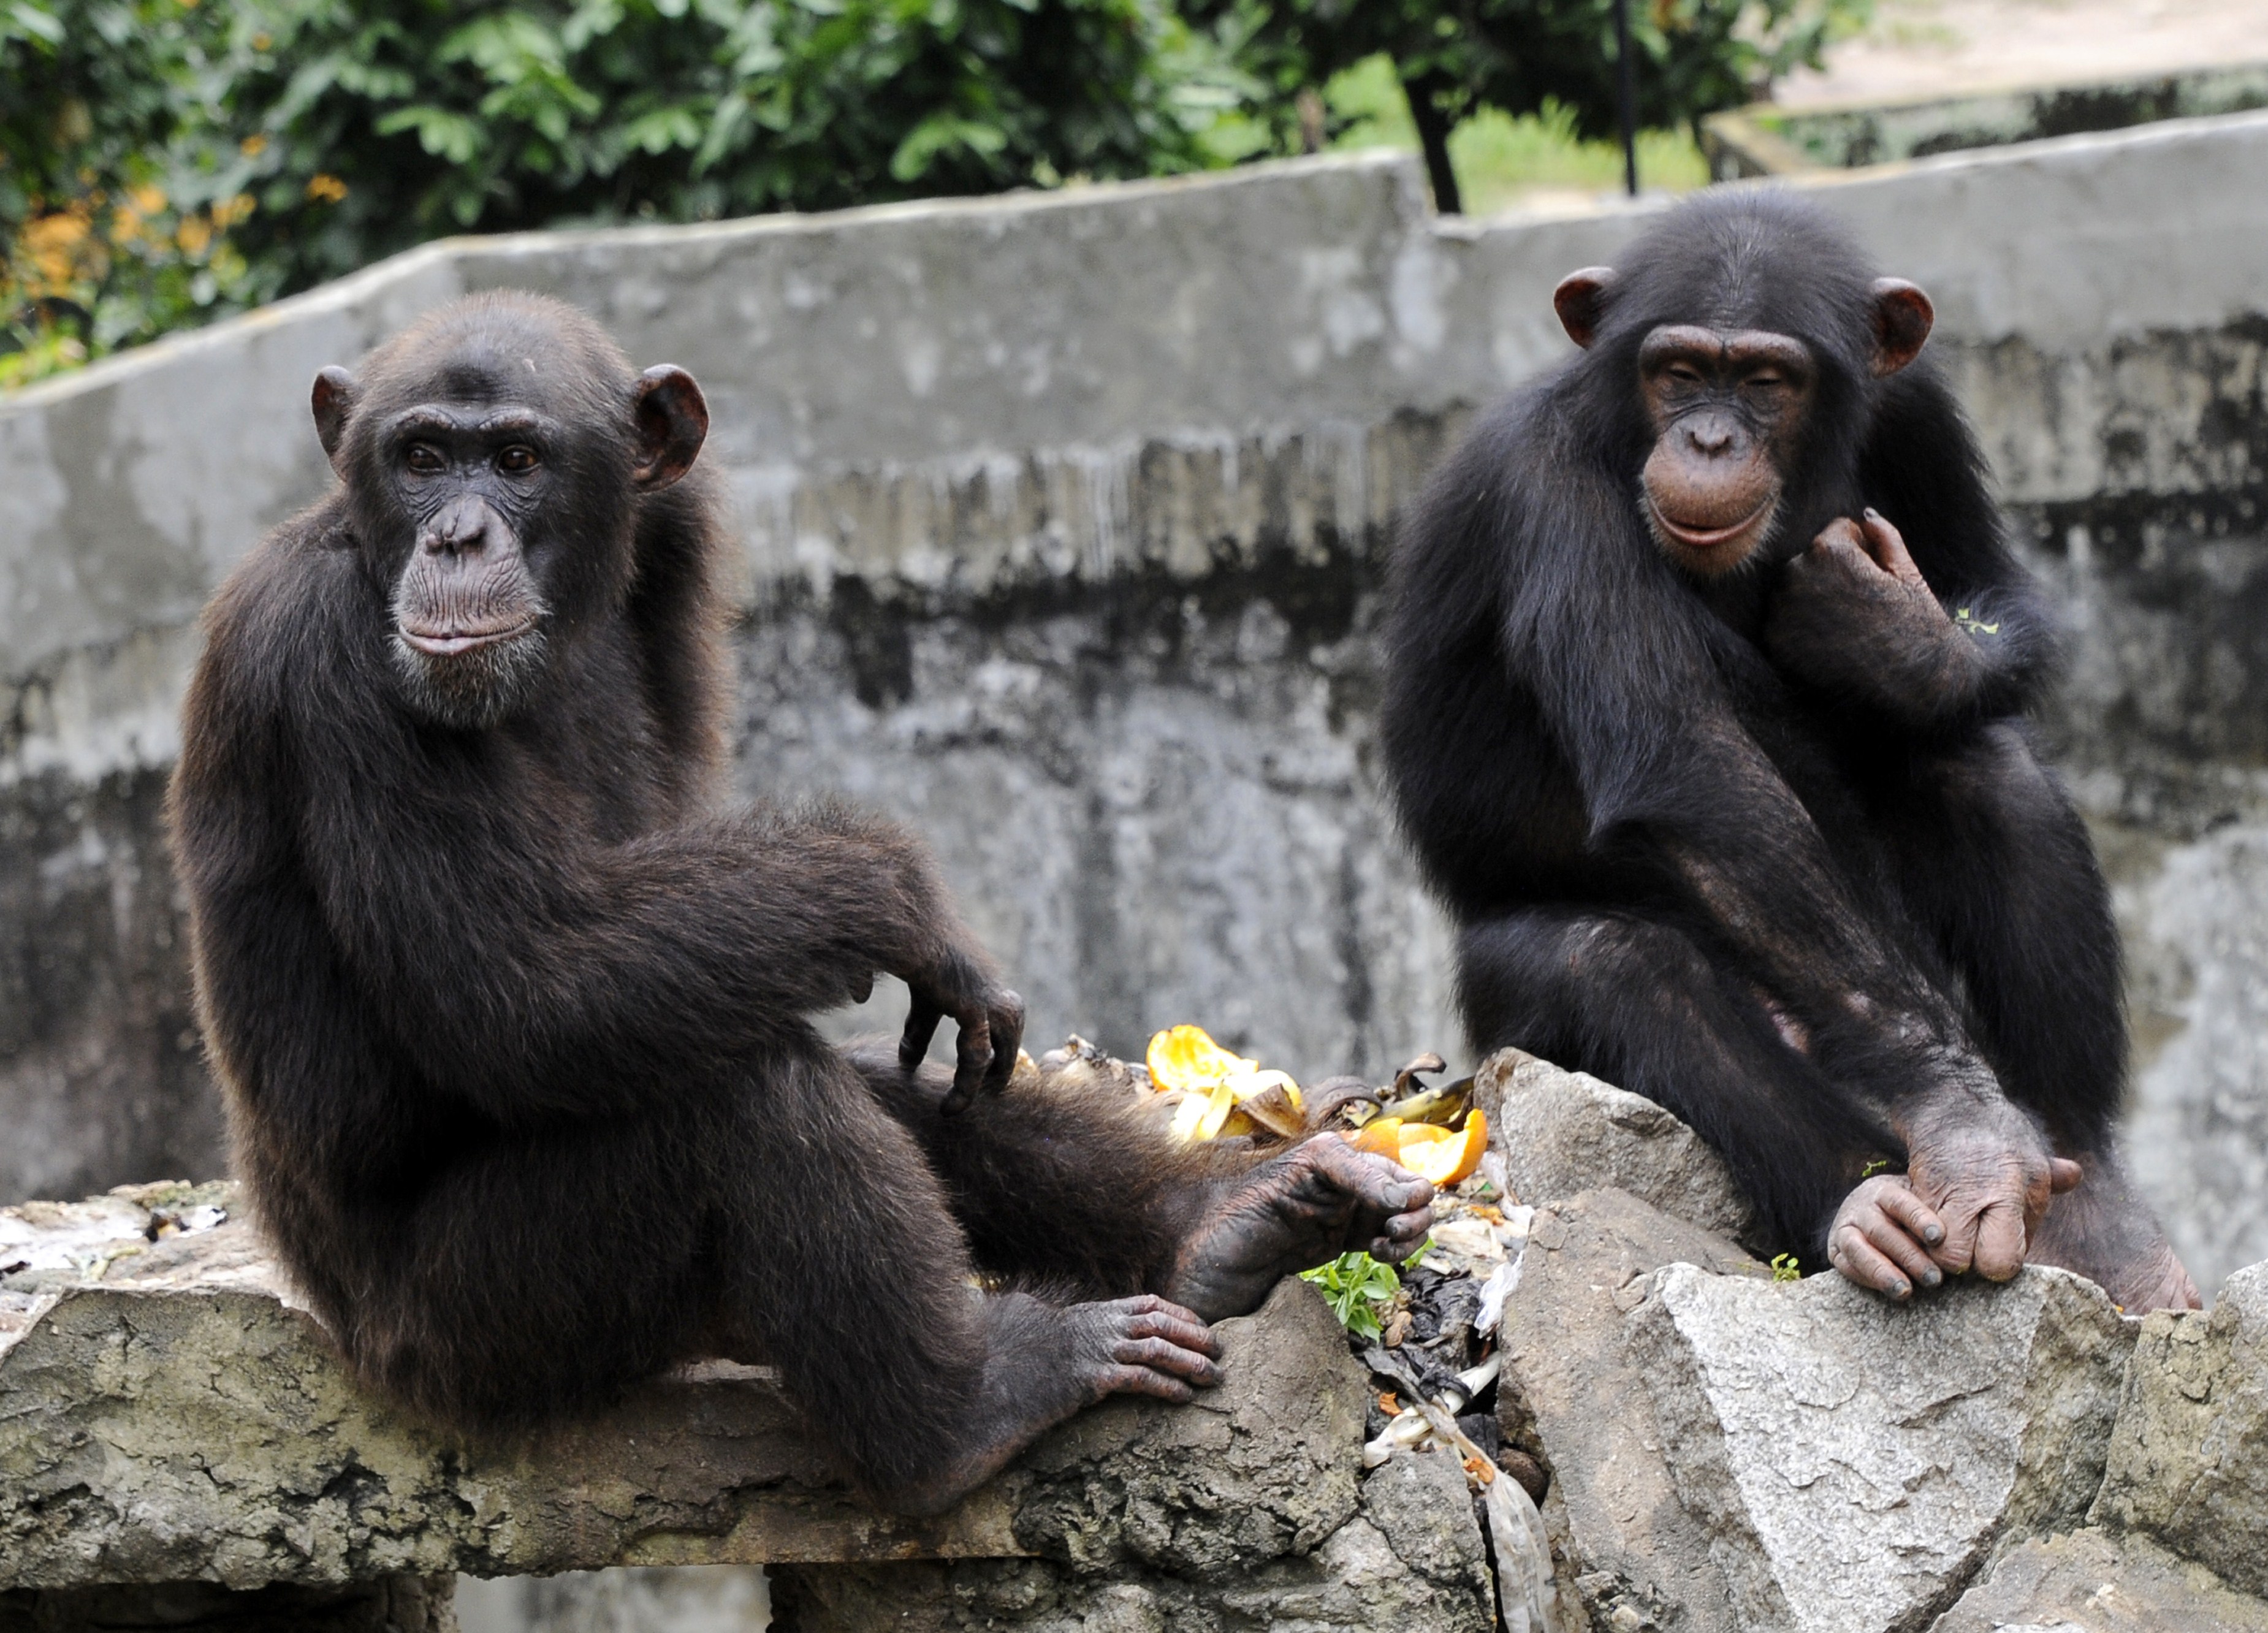 A chimpanzee holds a lettuce at the zoo in Abidjan, Ivory Coast, on June 12, 2014 (Sia Kambou&mdash;AFP/Getty Images)